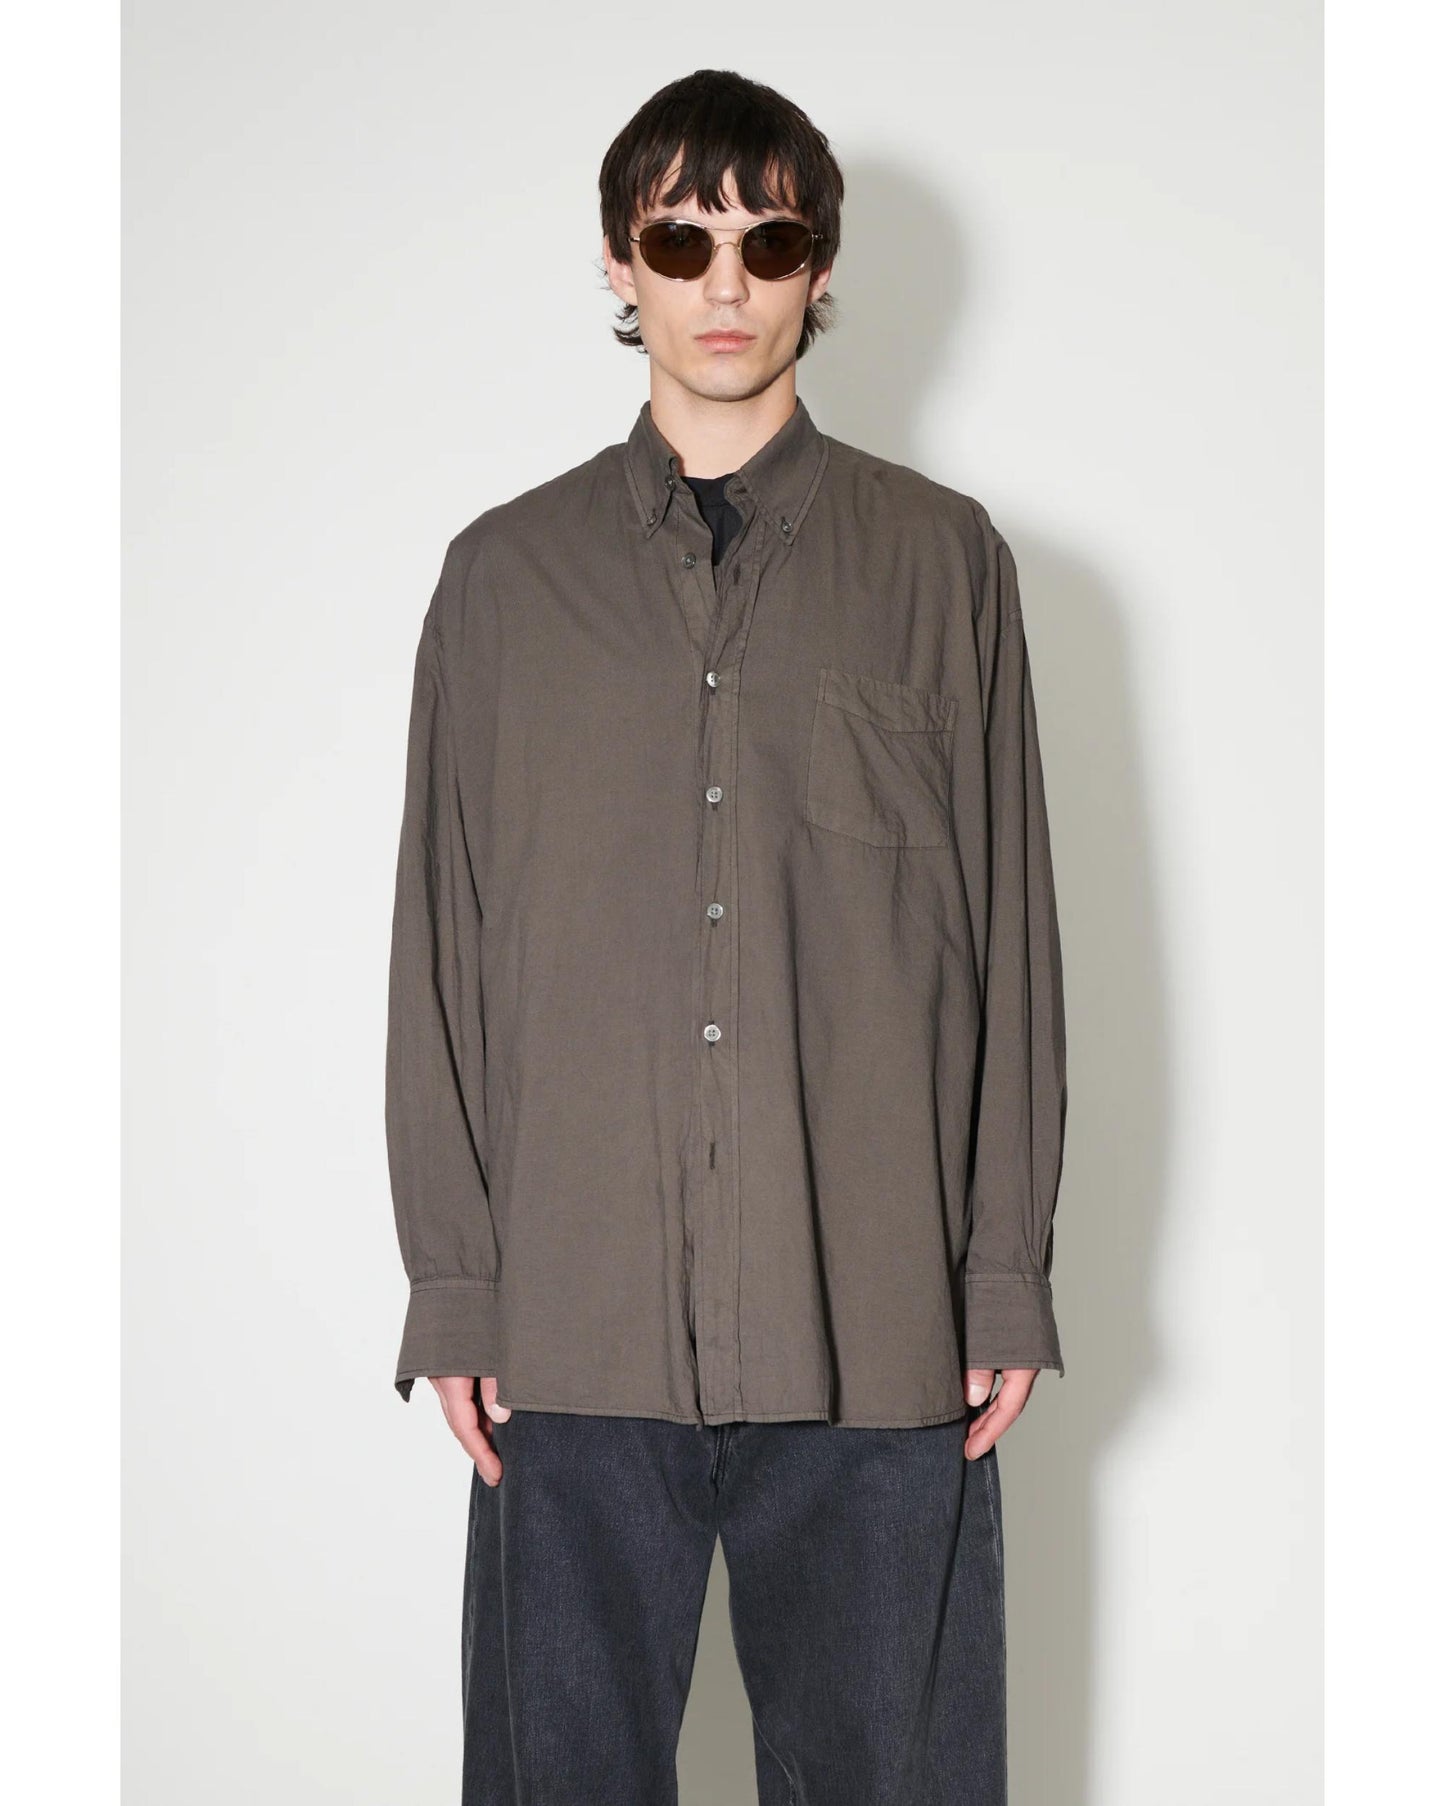 BORROWED BD SHIRT Faded Brown Cotton Voile